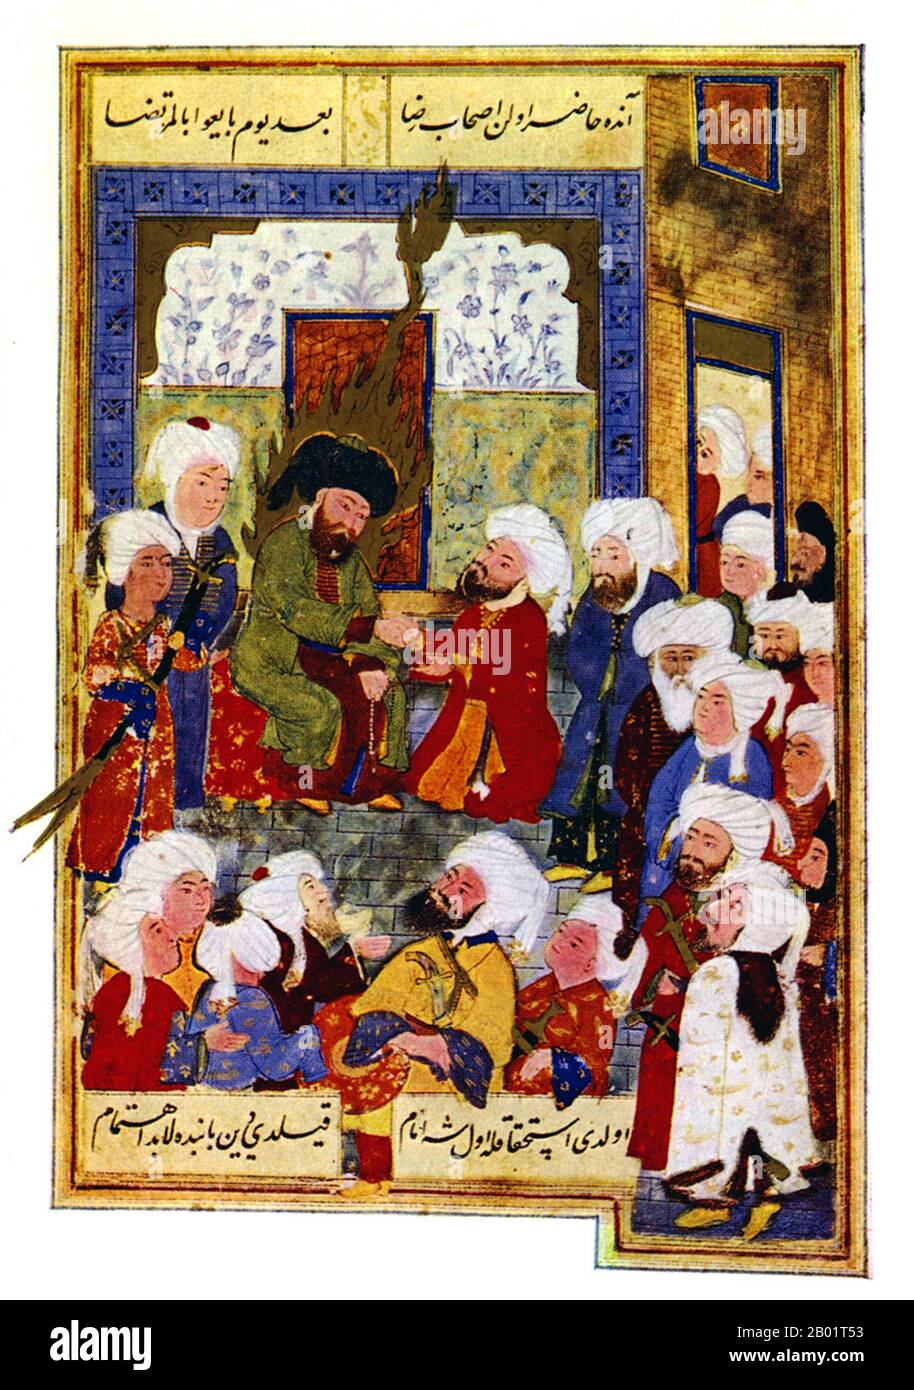 Turkey: Ali ibn Talib, son-in-law of the Prophet Muhammad, receiving the oath of allegiance as the 4th Rashidun Caliph at Kufa. Miniature painting, 16th century.  Alī ibn Abī Ṭālib (c. .598-661 CE) was the son of Abu Talib and was also the cousin and son-in-law of the Prophet, Muhammad. He ruled over the Islamic Caliphate from 656 to 661, and was the first male convert to Islam.  Sunnis consider Ali the fourth and final of the Rashidun (rightly guided) Caliphs, while Shia regard Ali as the first Imam and consider him and his descendants the rightful successors to Muhammad. Stock Photo